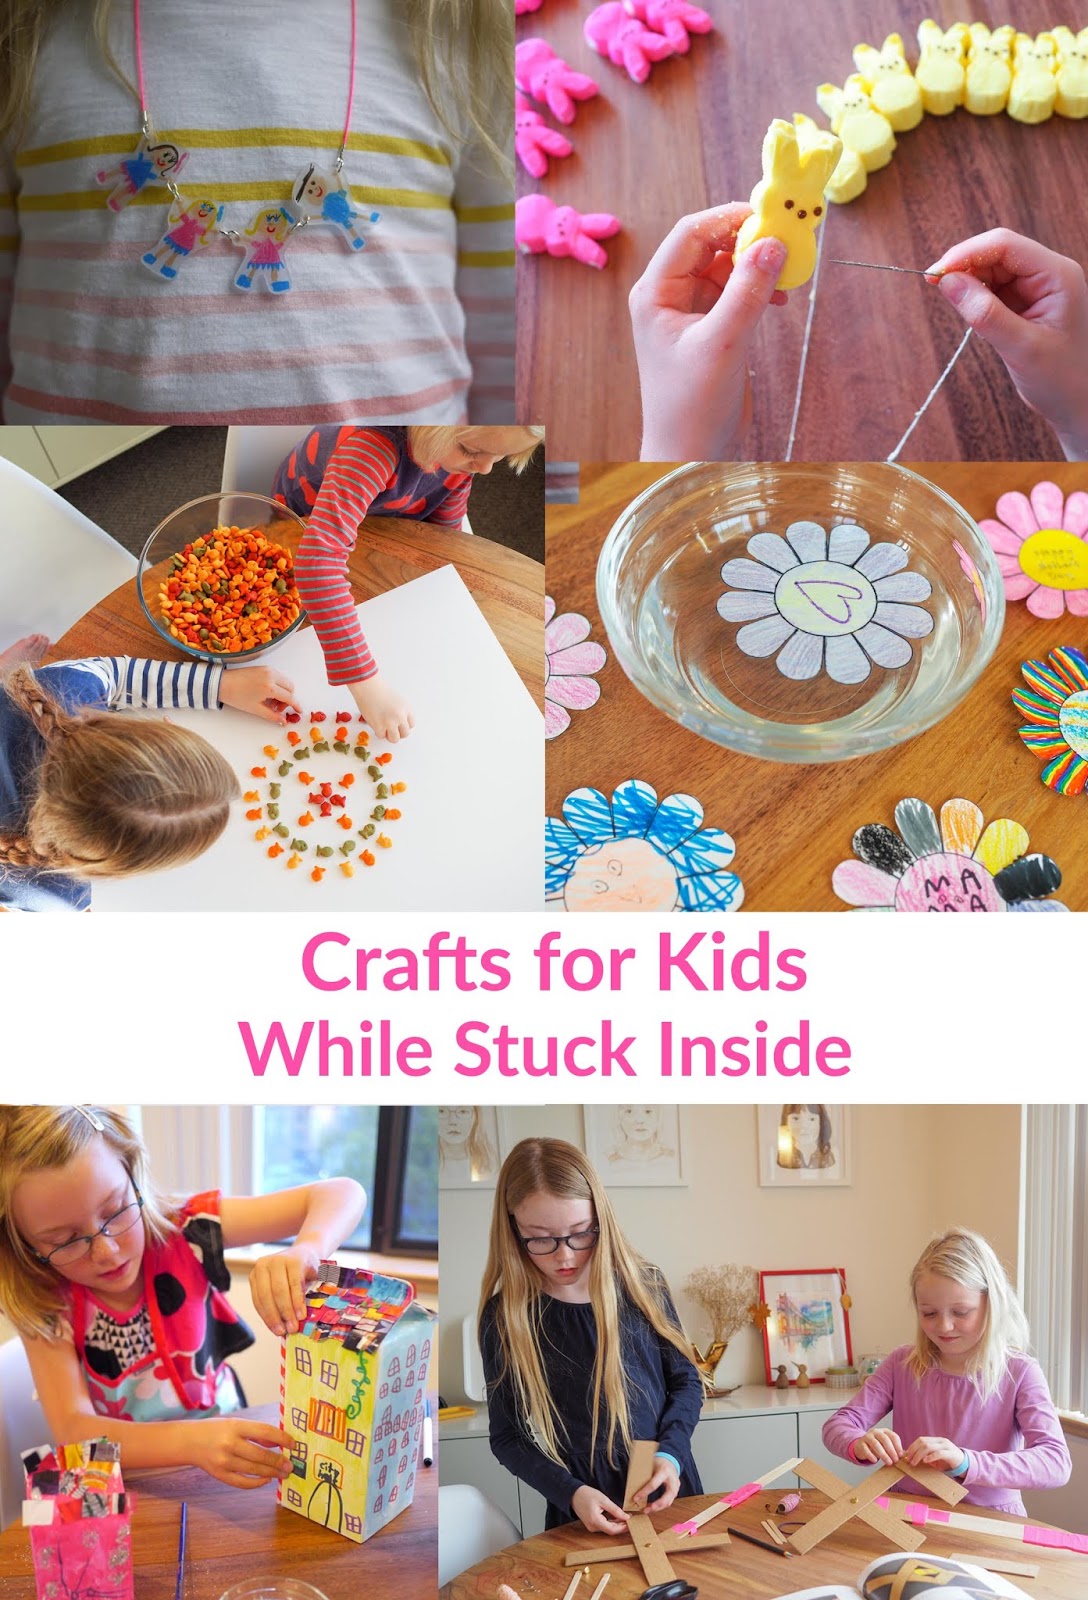 1 Month of Daily Kids' Crafts and Activities to Make with Your Kids